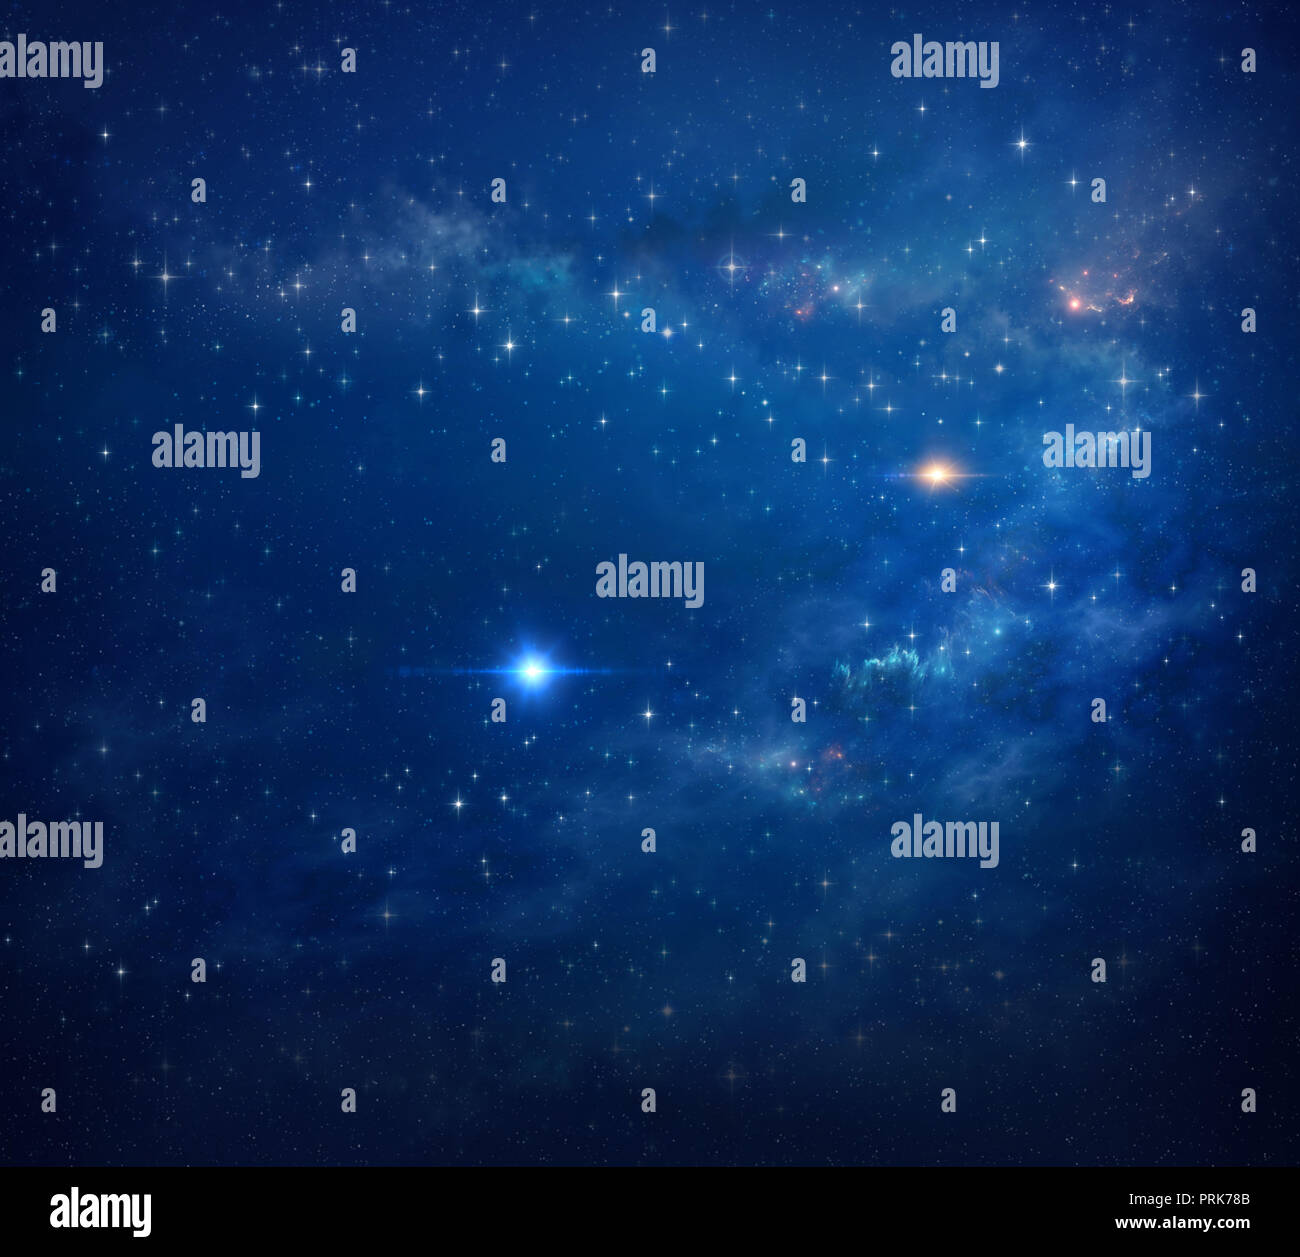 Galaxy and star clusters in deep space. High definition constellations background. Stock Photo